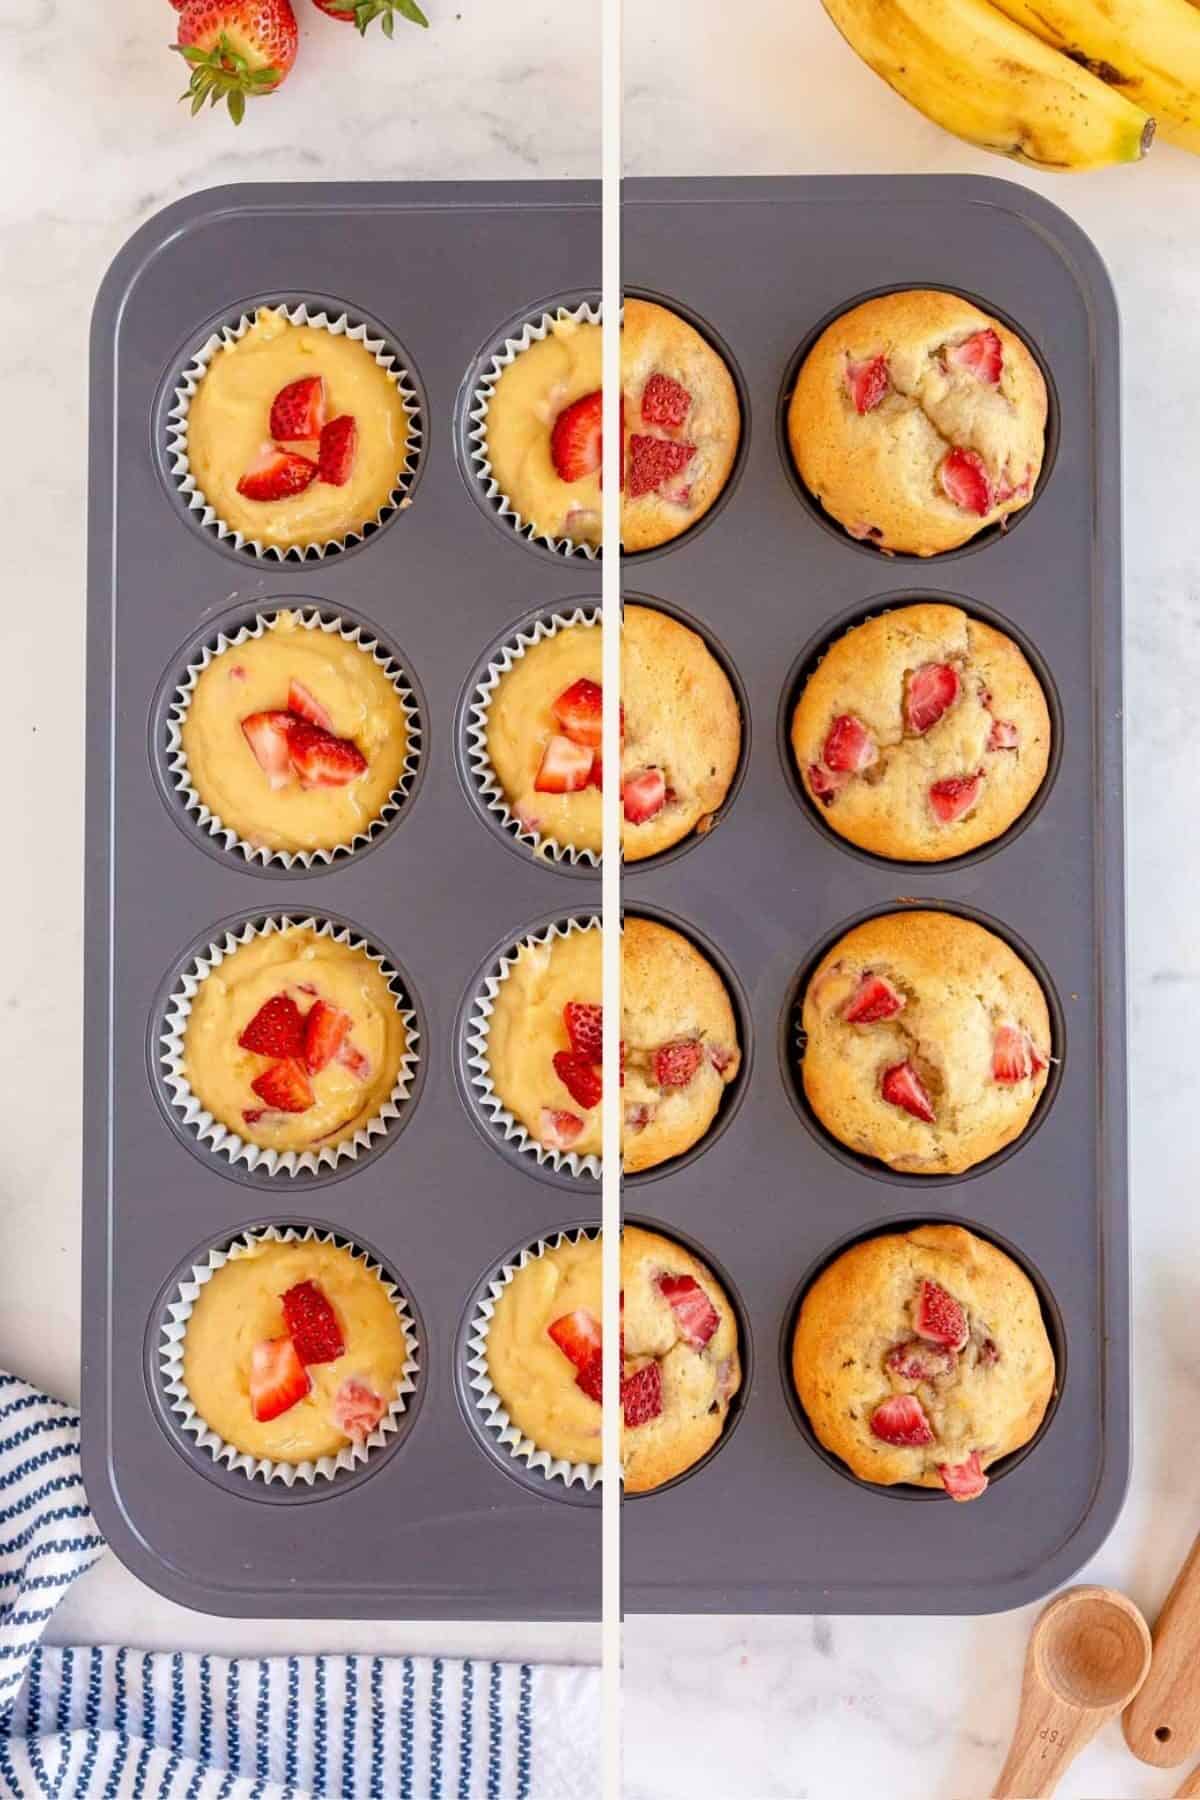 unbaked and baked muffins picture in half